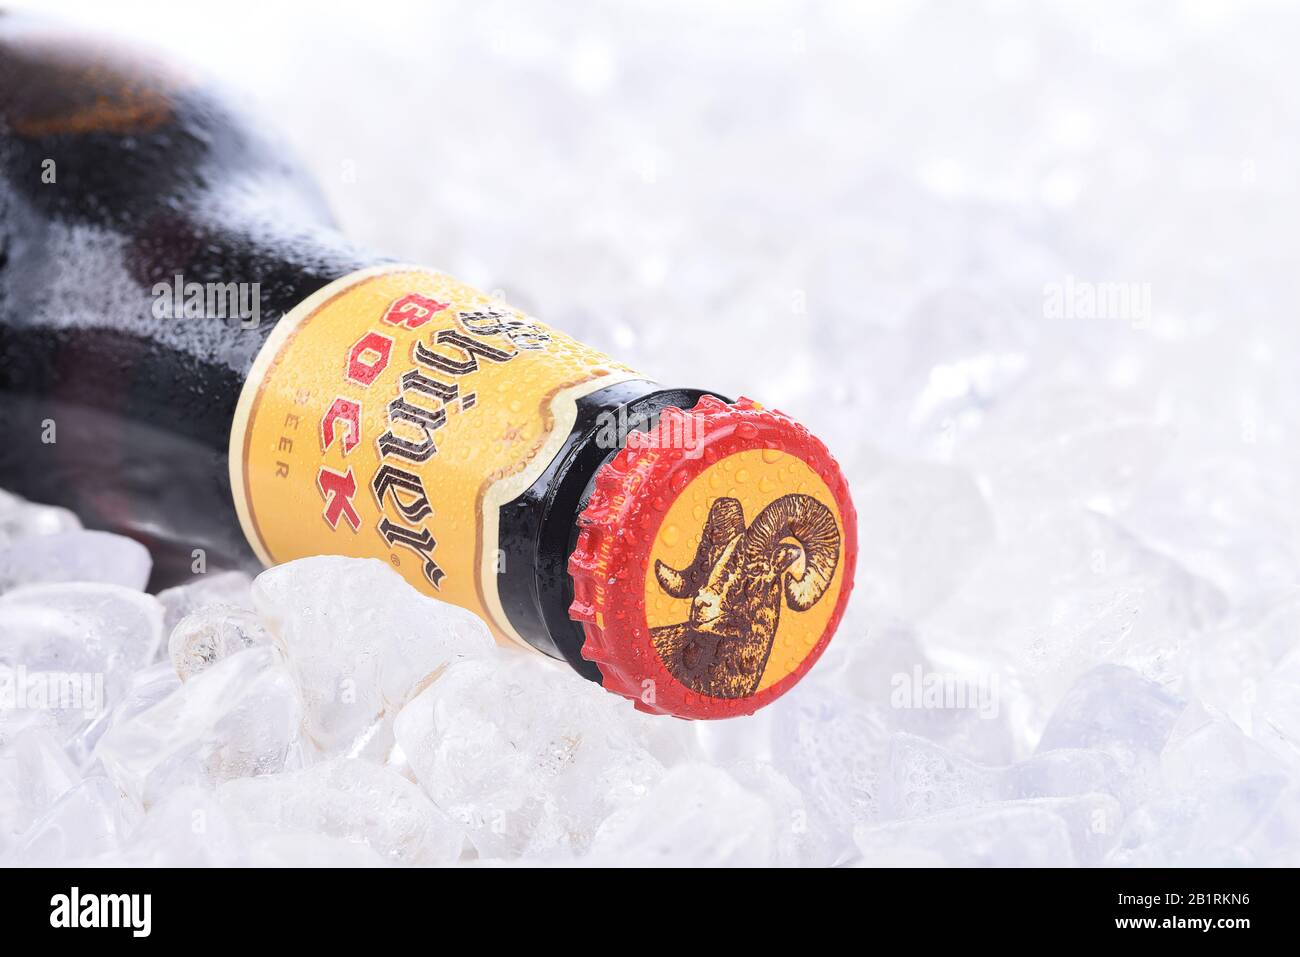 IRVINE, CA - AUGUST 26, 2016: Shiner Bock Beer. A single bottle of Shine Bock beer from the Spoetzl Brewery in Shiner, Texas. Founded in 1909 by Germa Stock Photo